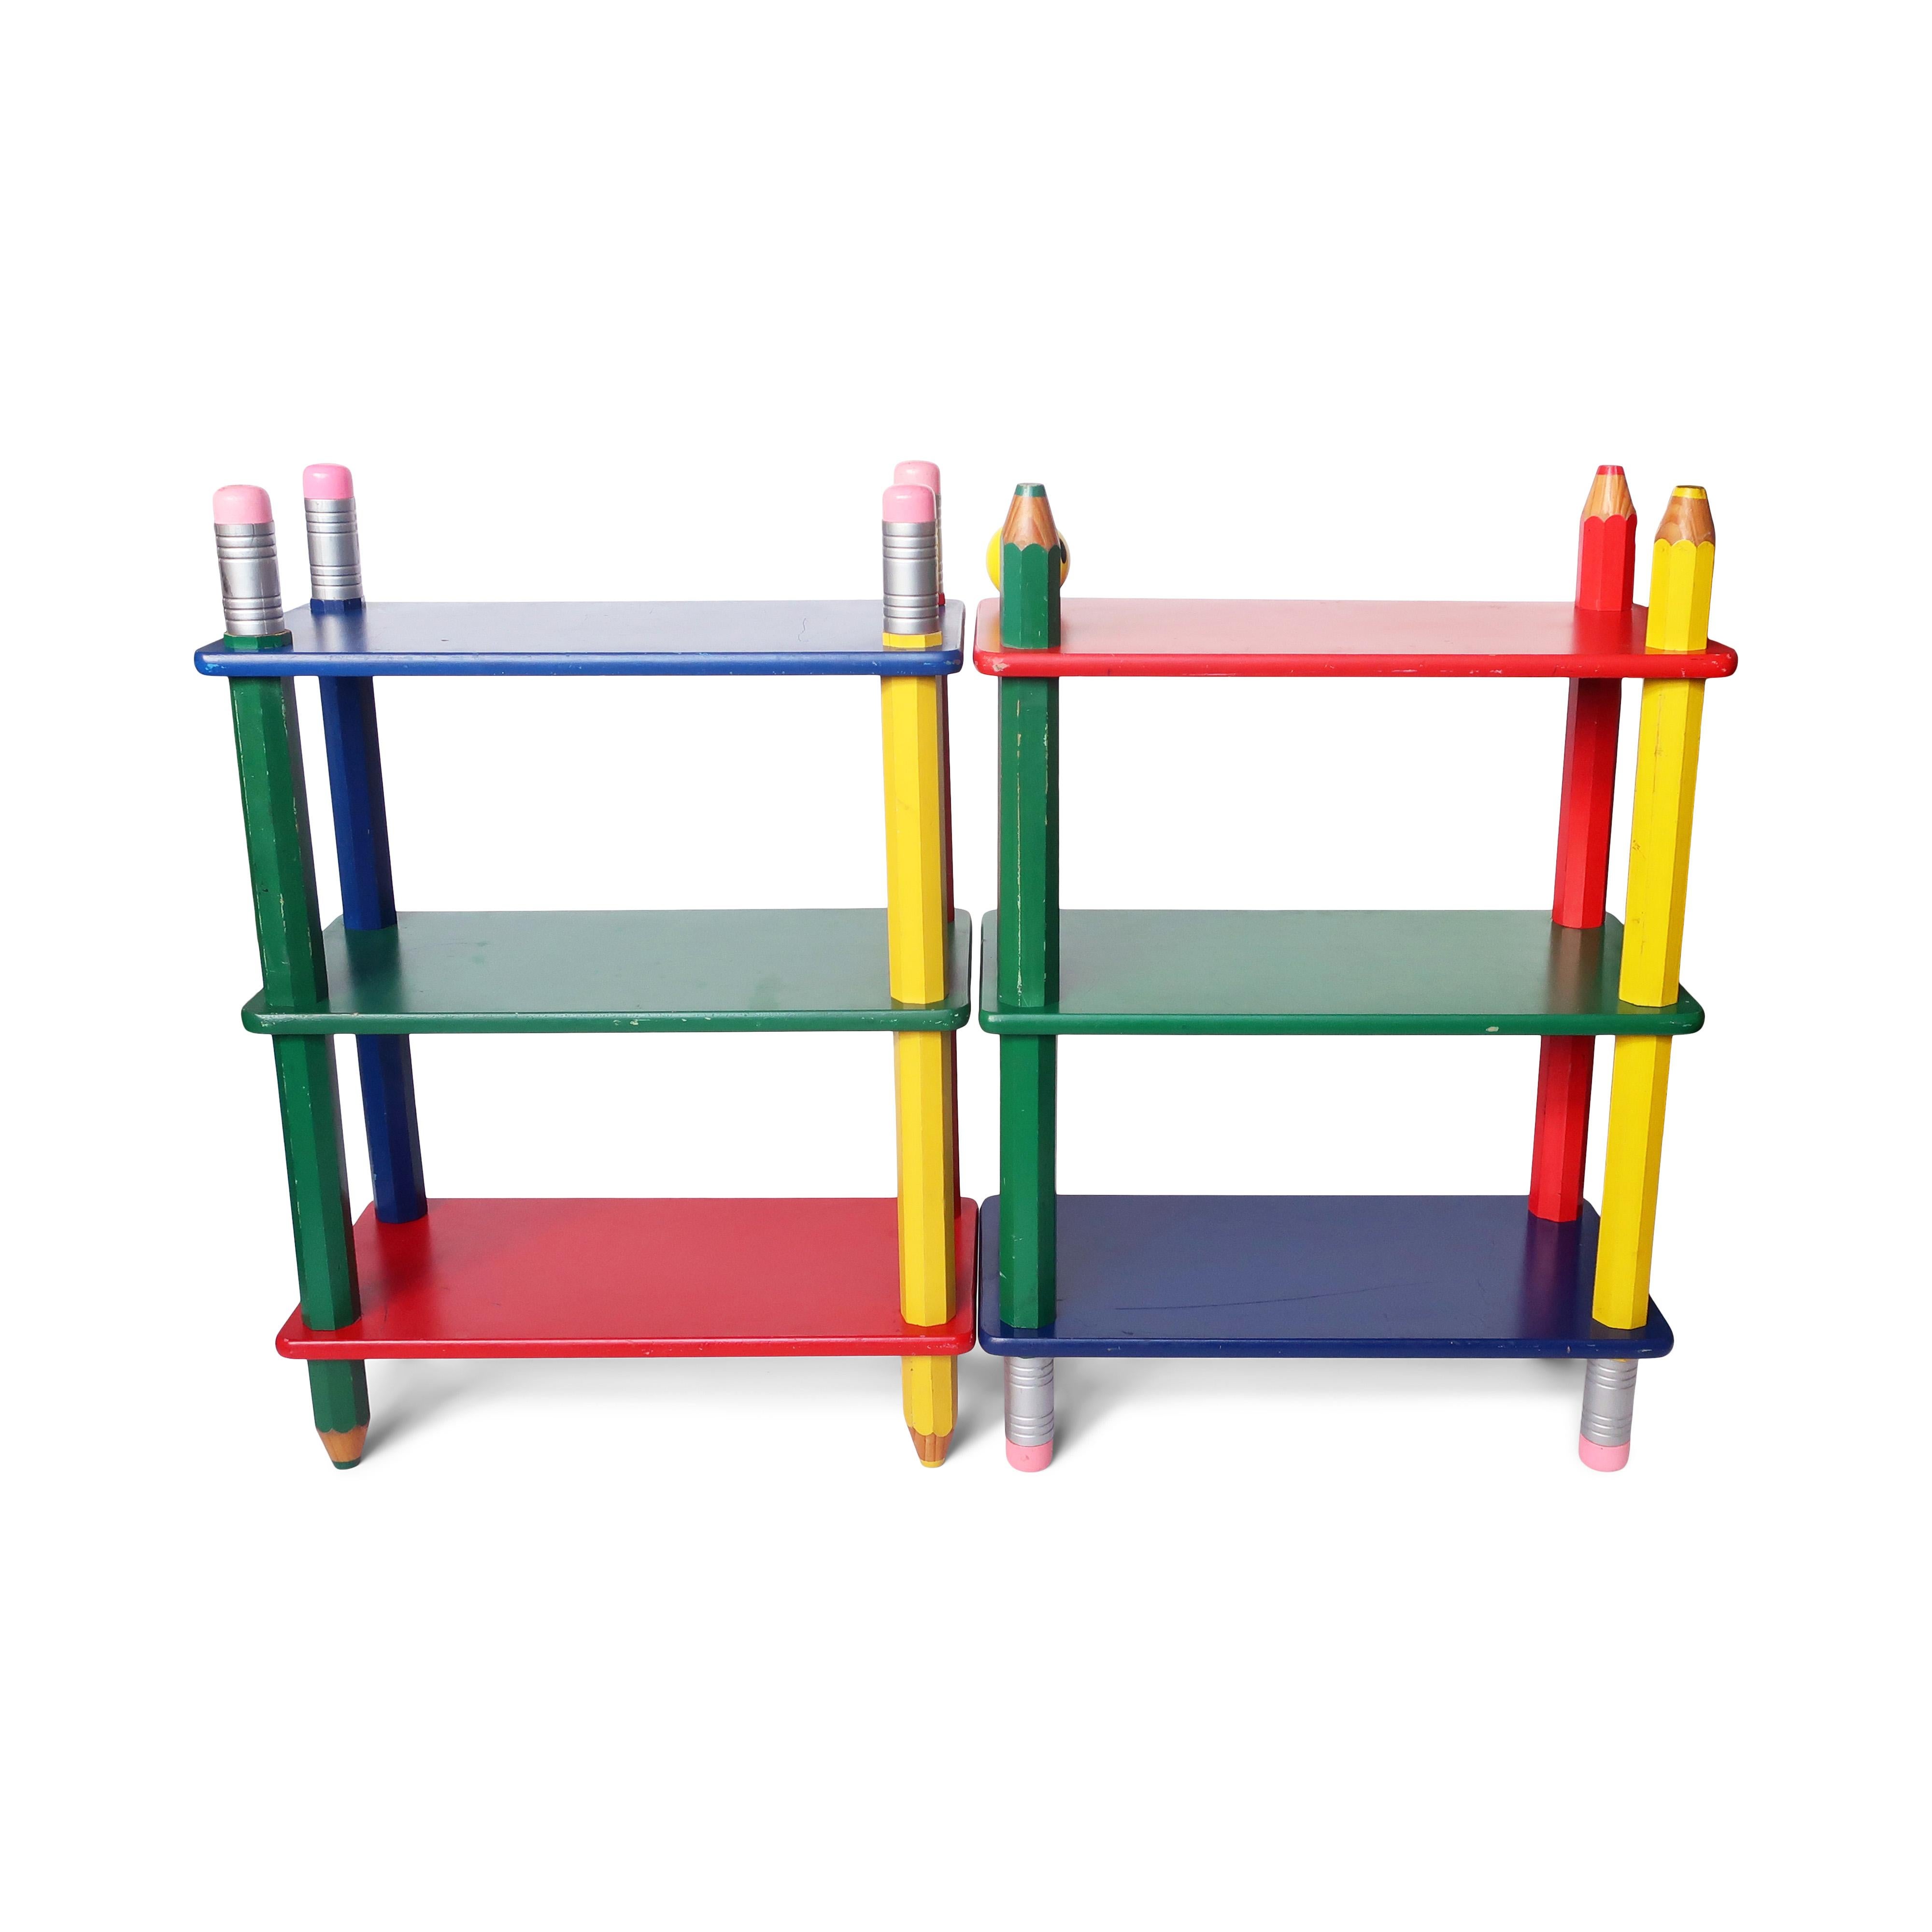 A pair of great pieces from Pierre sala's postmodern pencil themed children's furniture from the 1980s for Pierre Sala Furniture. Its striking primarily colored design is composed of three shelves (one blue, one green, and one red) supported by four